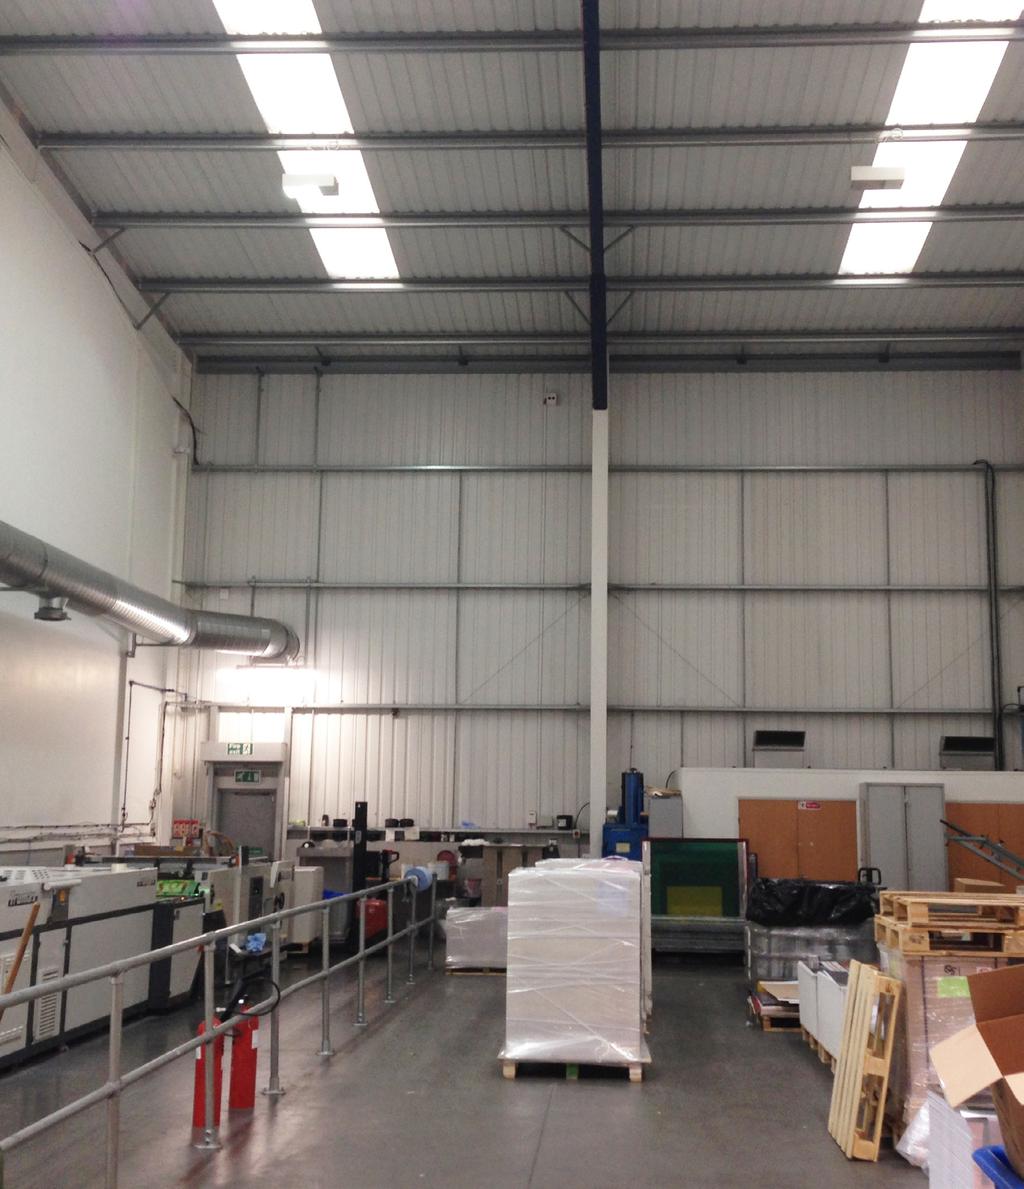 Investment summary Fully let, modern warehouse unit located in a well established industrial area of Slough Let to 2A excellent covenant AGI World Ltd 20 year lease commencing on the 3rd July 2013 at